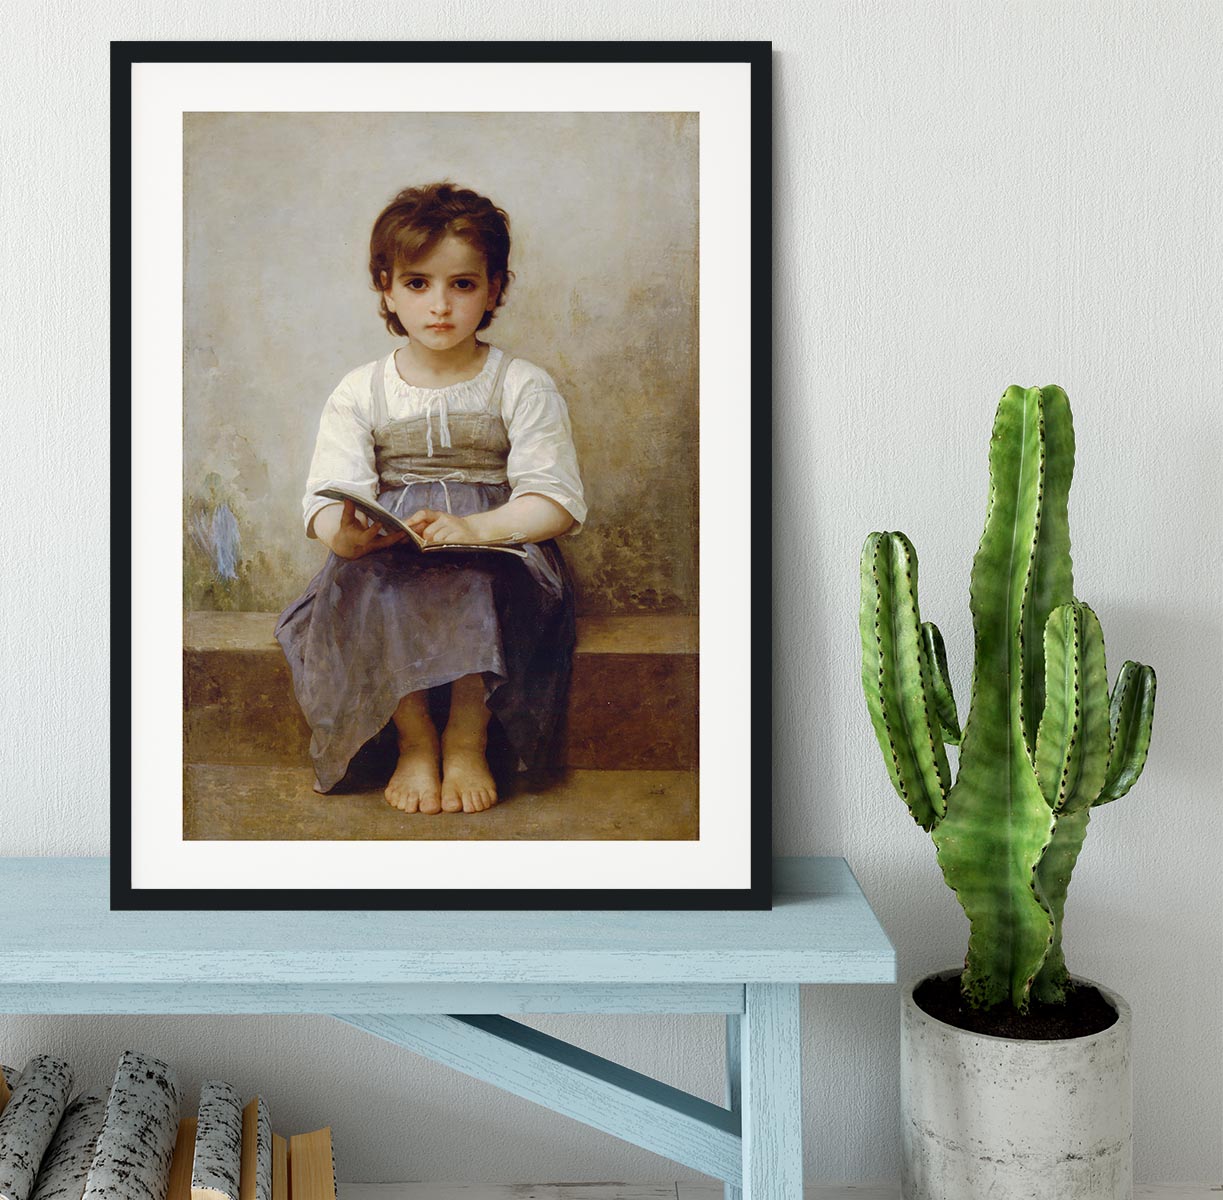 The Difficult Lesson By Bouguereau Framed Print - Canvas Art Rocks - 1